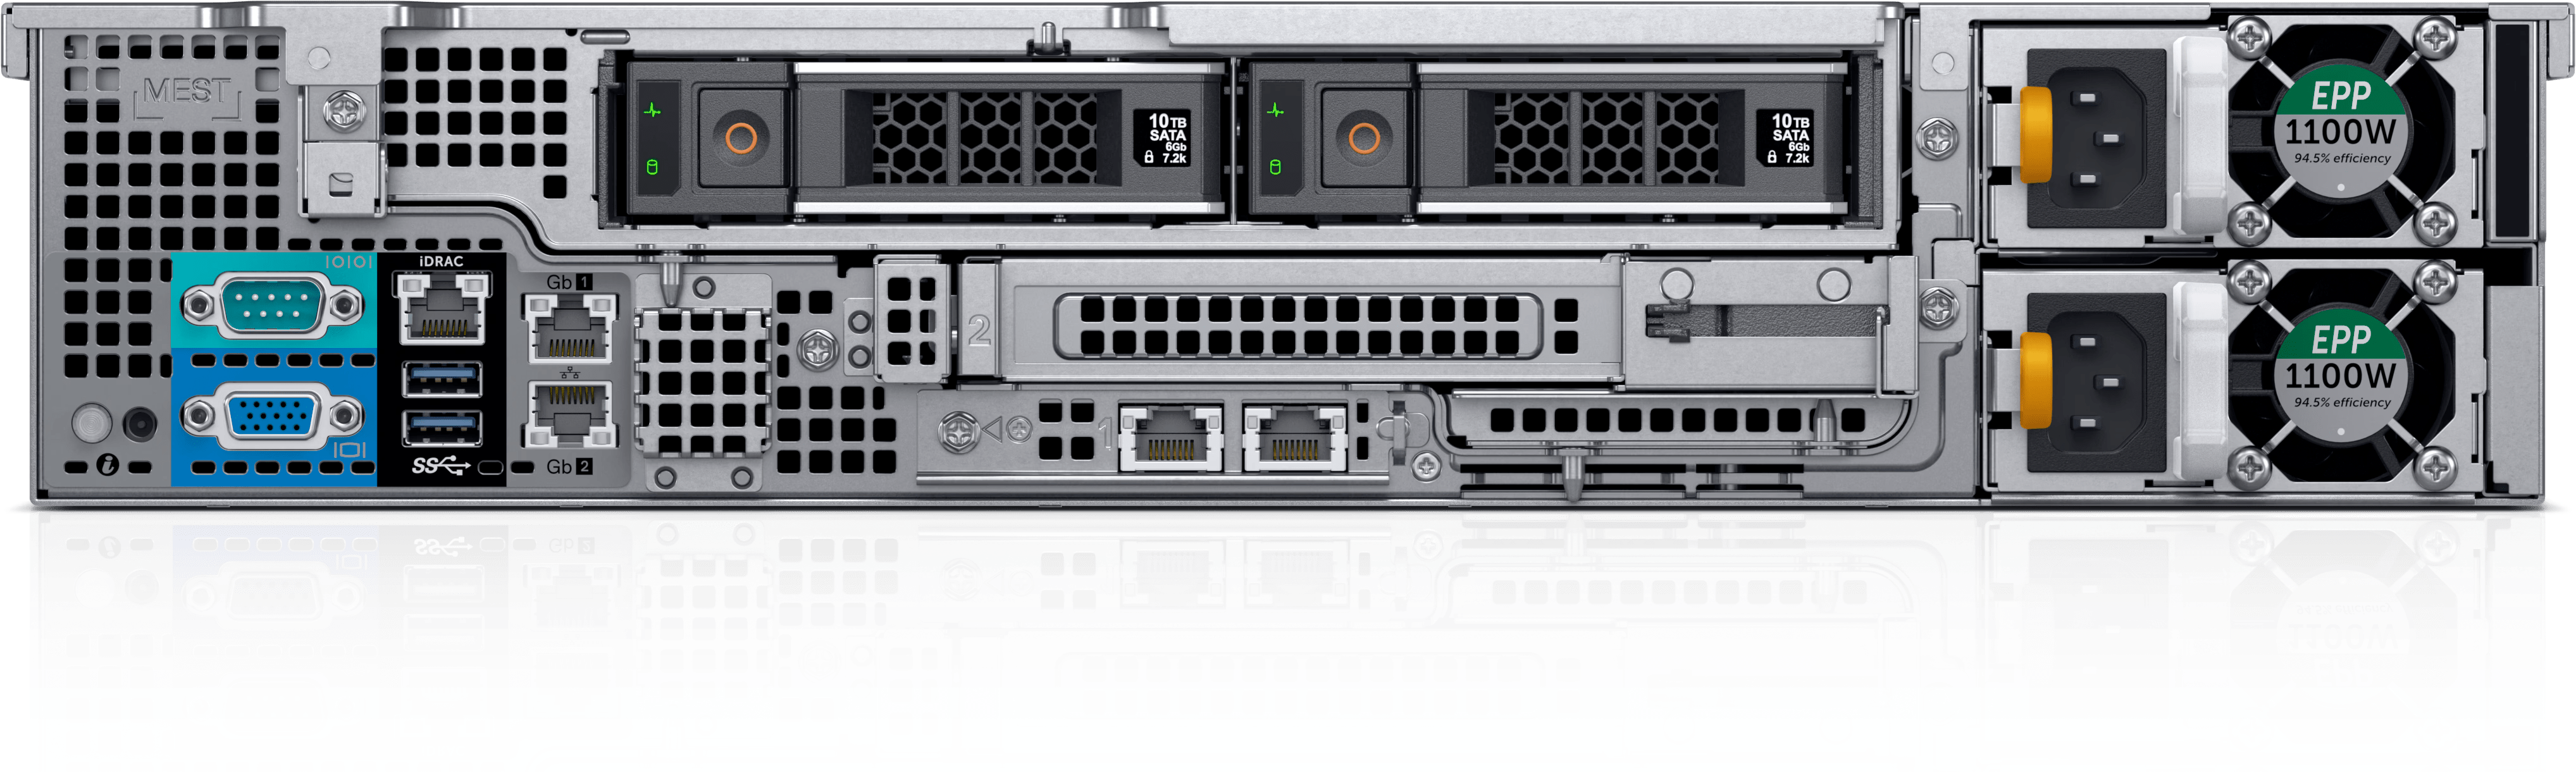 DELL SERVER 2.0 POWER EDGE R540 3.5" CHASSIS WITH UPTO 8 3.5"/2.5" HDD'S/SSD'S 2U - Golchha Computers